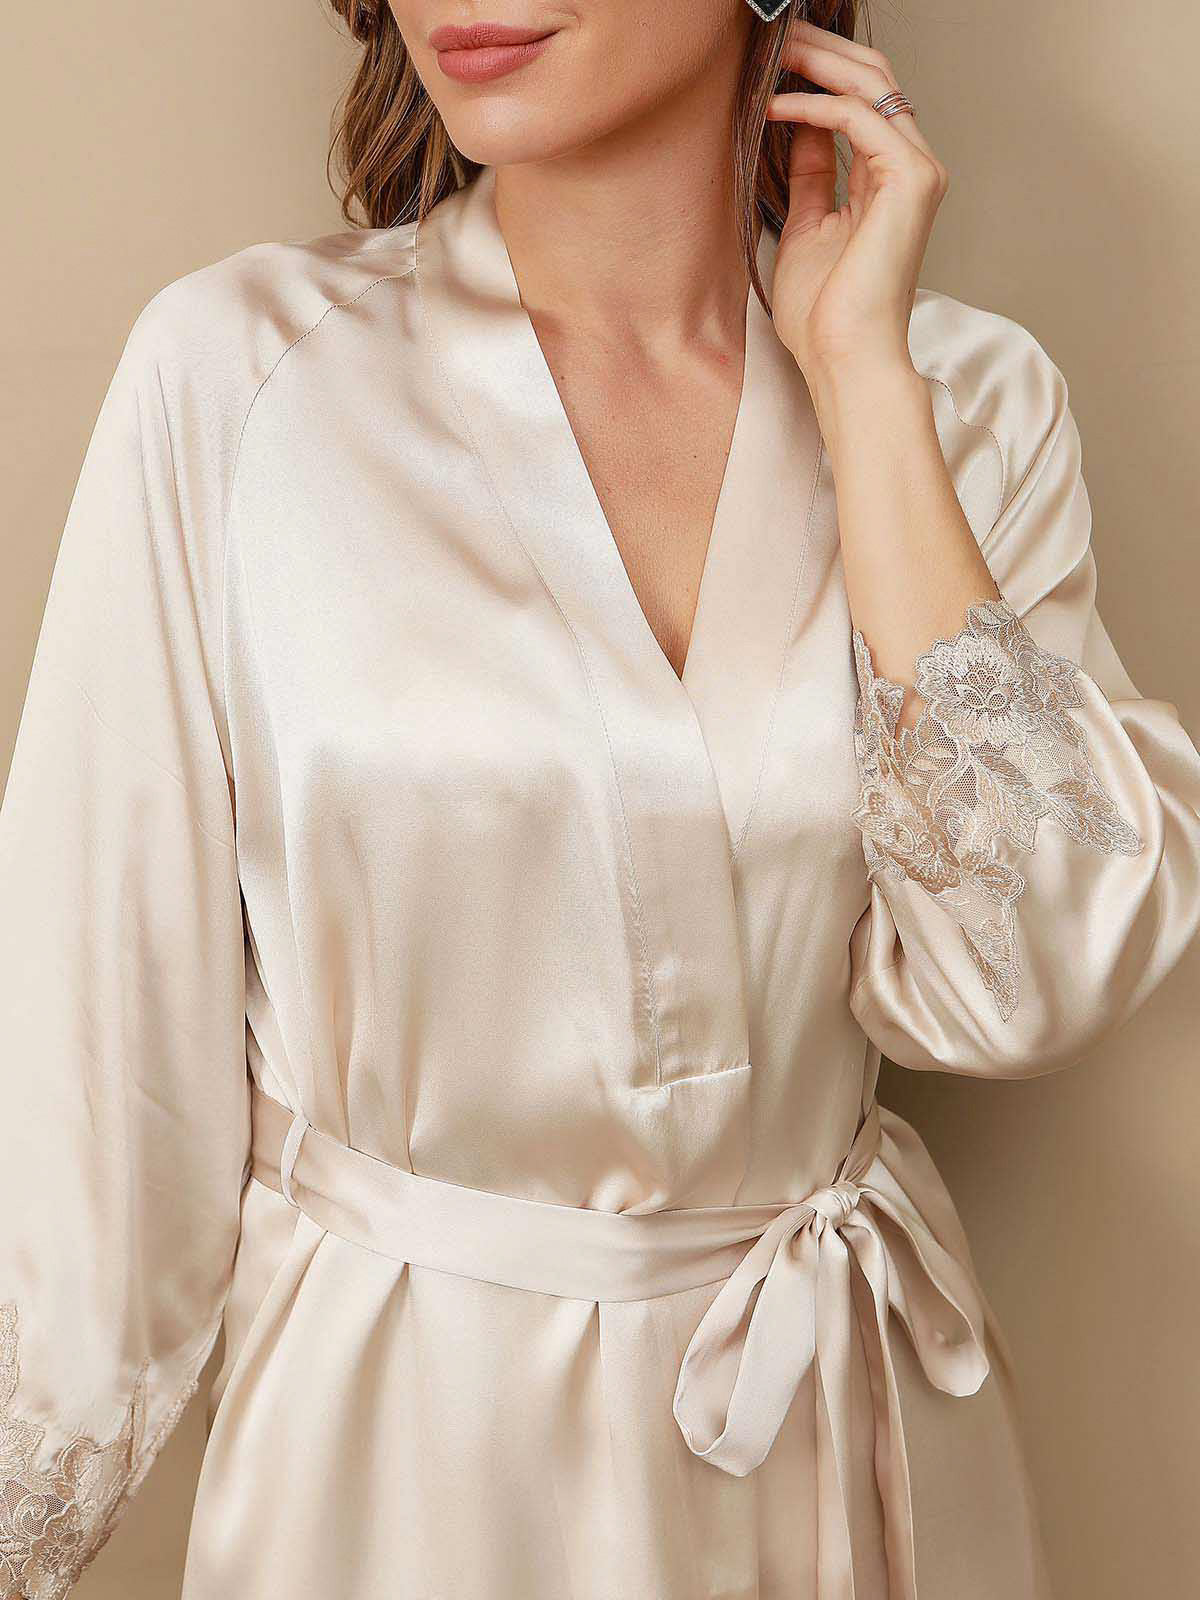 19 Momme Silk Nightgown Robe Set with Flower Trimming